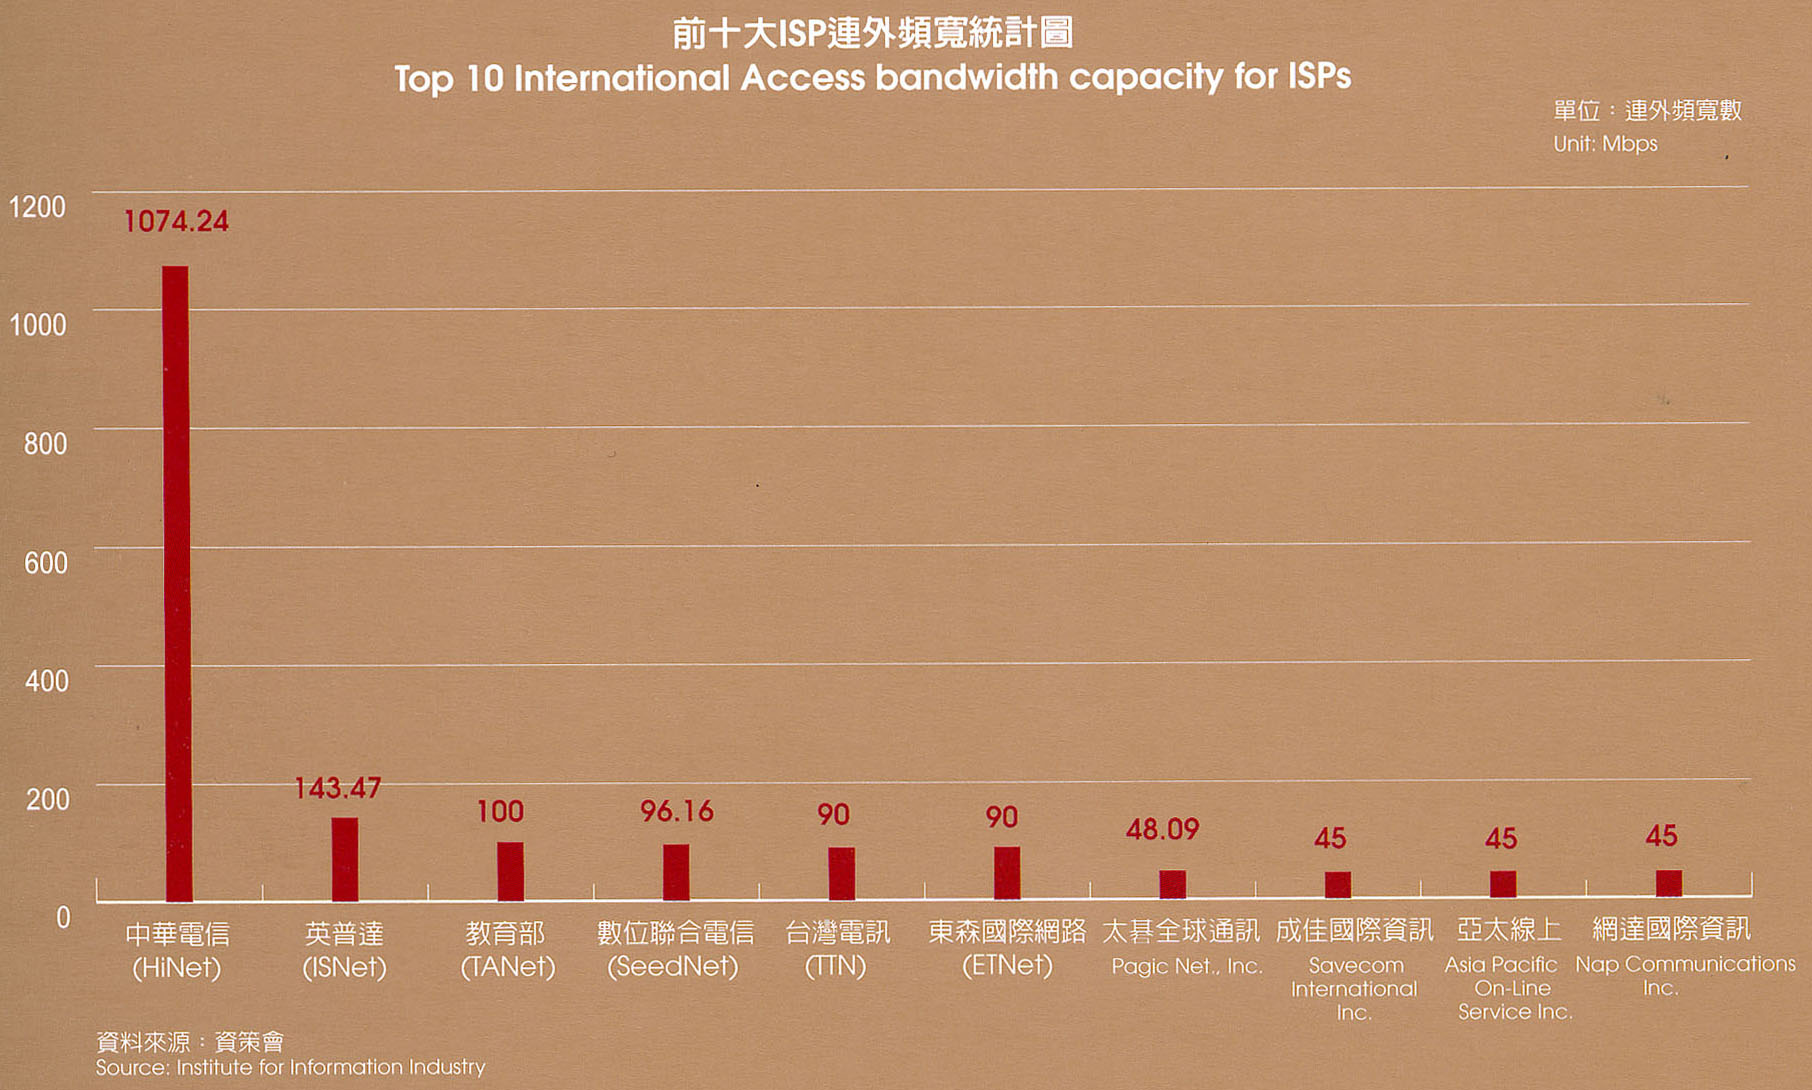 Top 10 International Access bandwidth capacity for ISPs